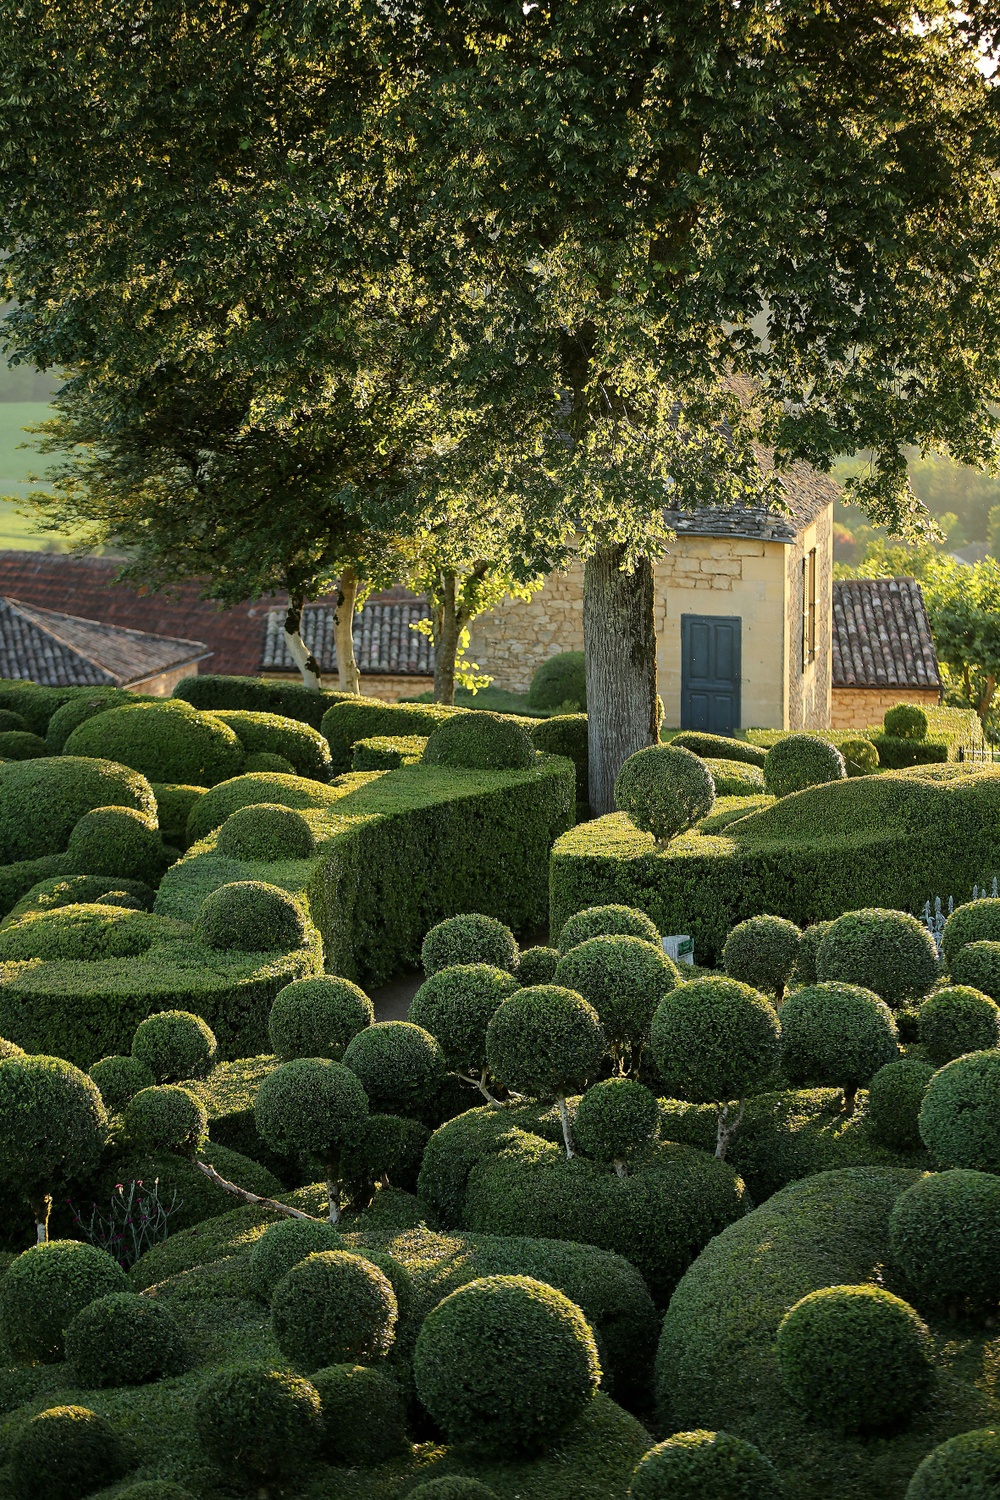 Julien de Cerval, The Gardens of Marqueyssac, France, designed in the 1860s © Laugery – The Gardens of Marqueyssac, Dordogne, France